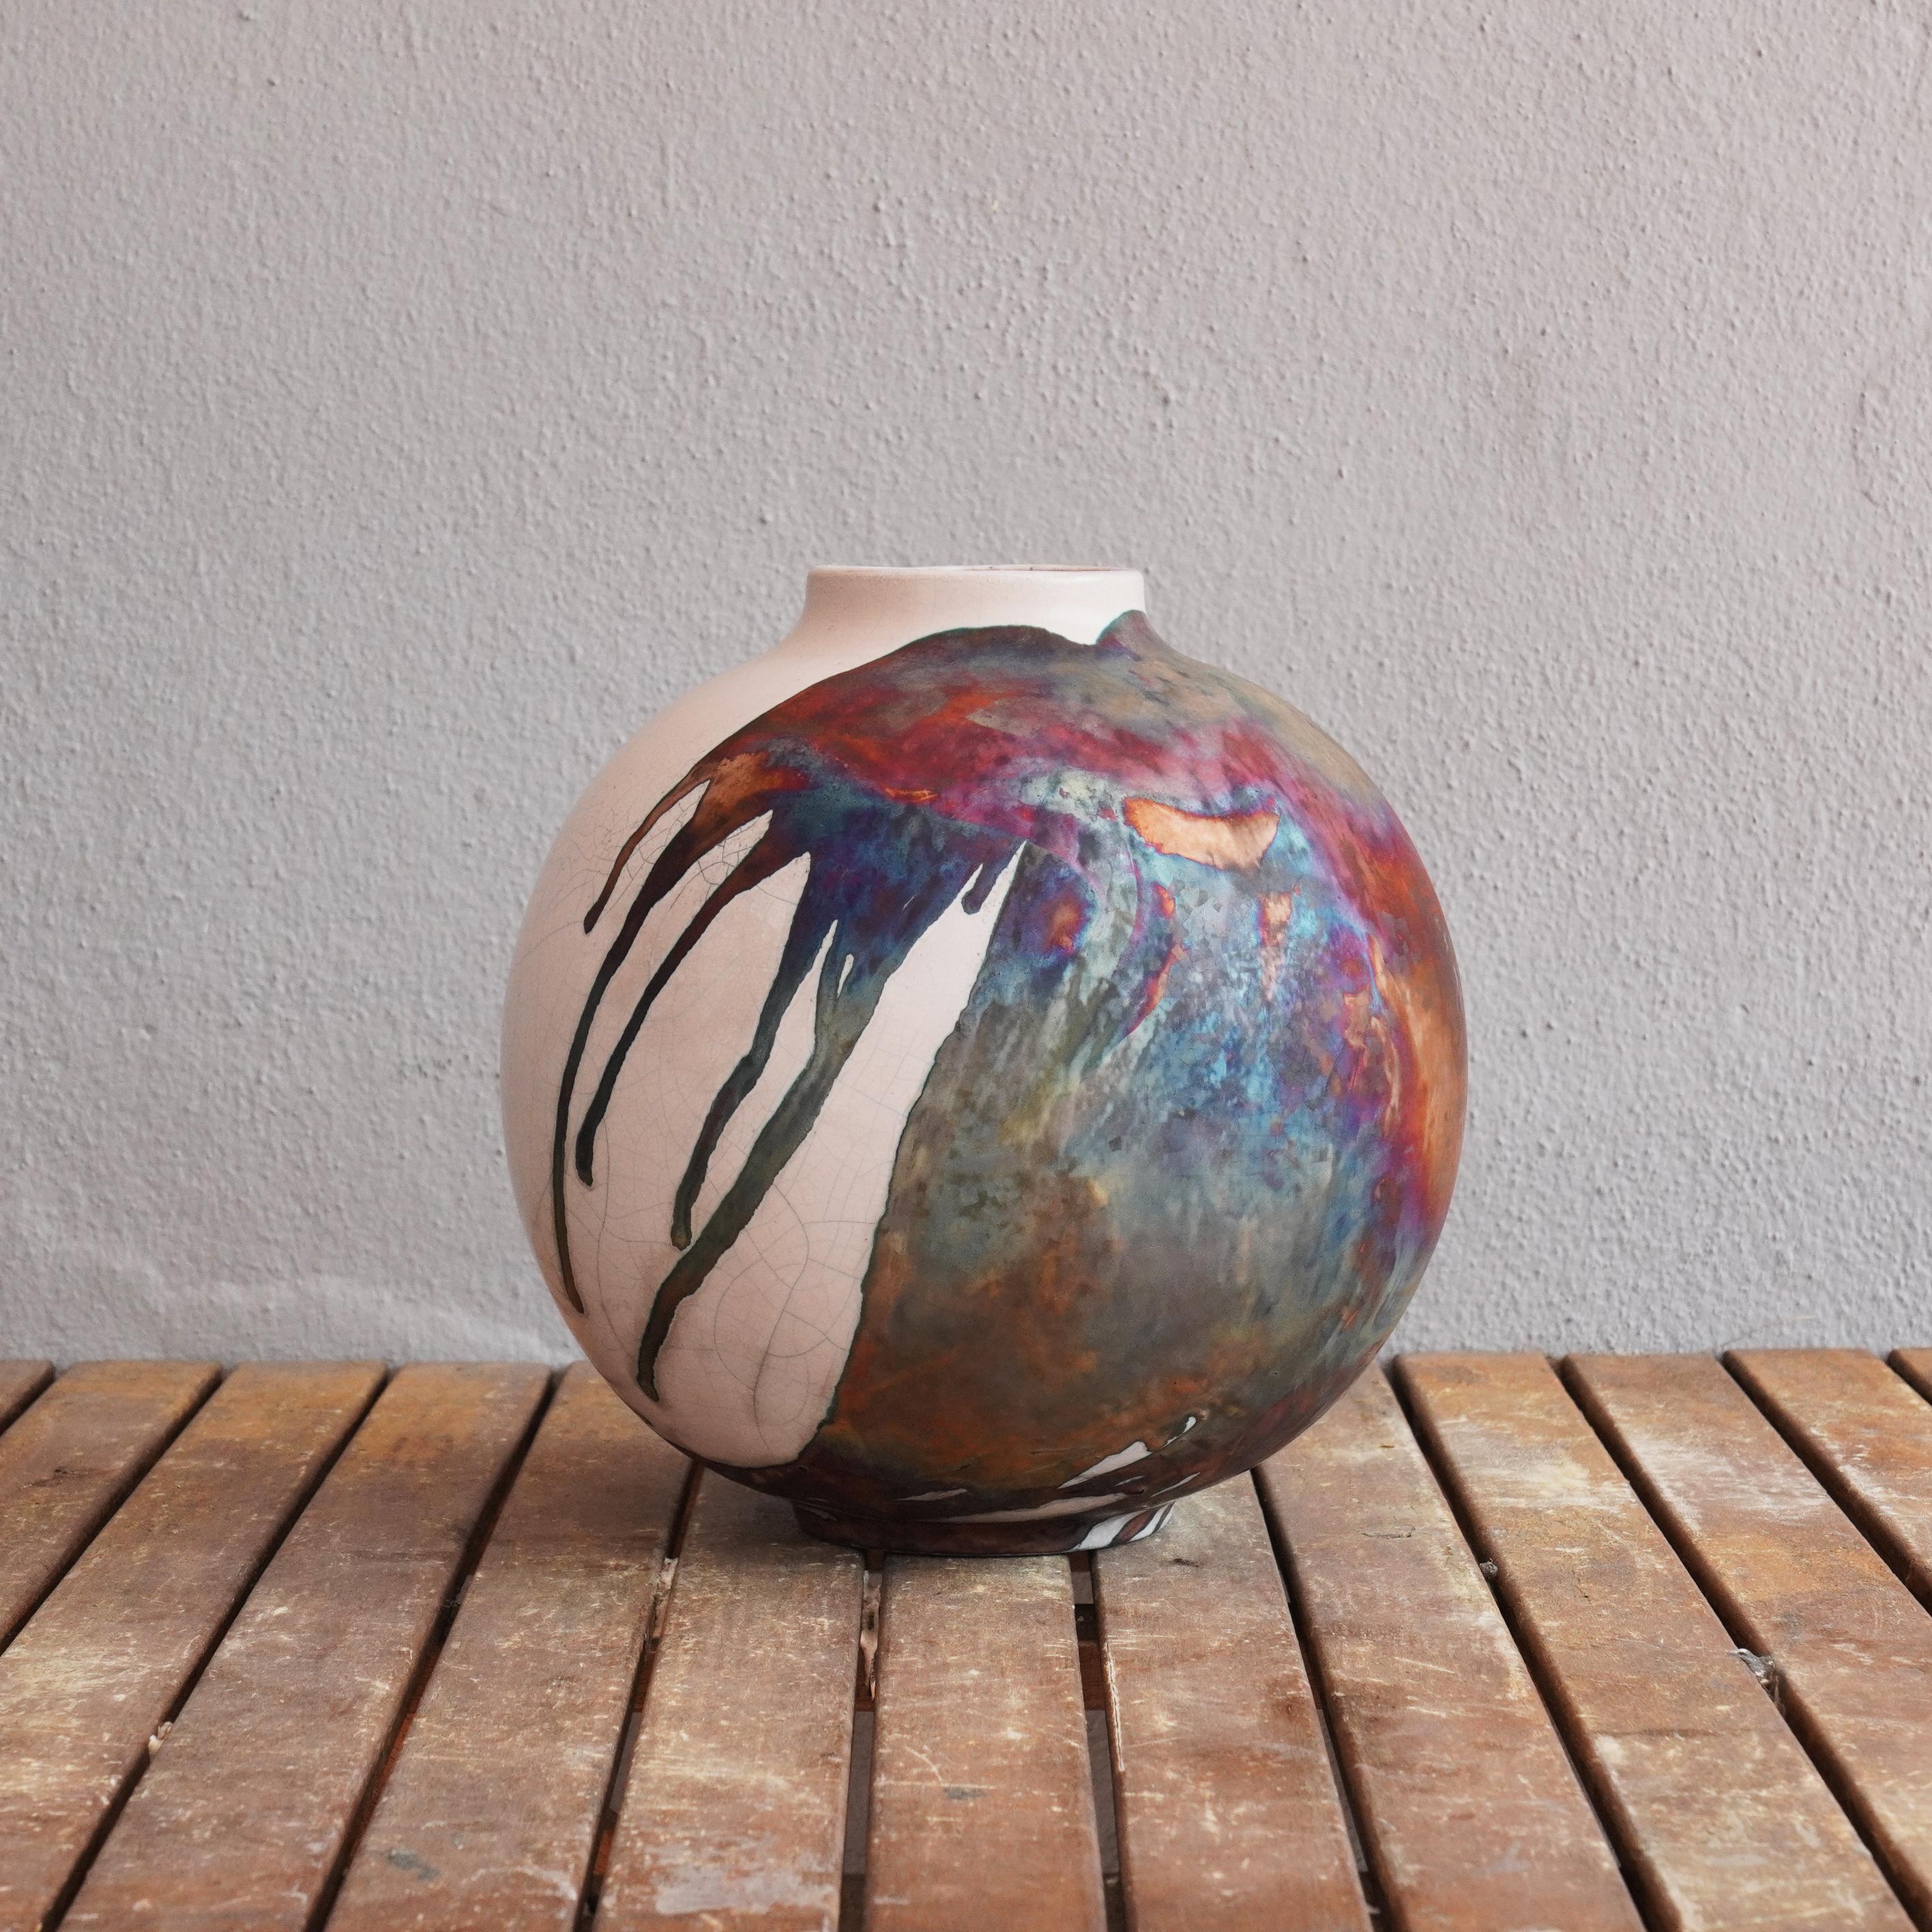 The Large Raku fired vase centerpiece Series by RAAQUU.

A mesmerizing sight to behold as soon as the rainbow-like patinas catch your eye. This Globe Vase is a round, capacious piece produced using the Raku technique, resulting in a beautiful